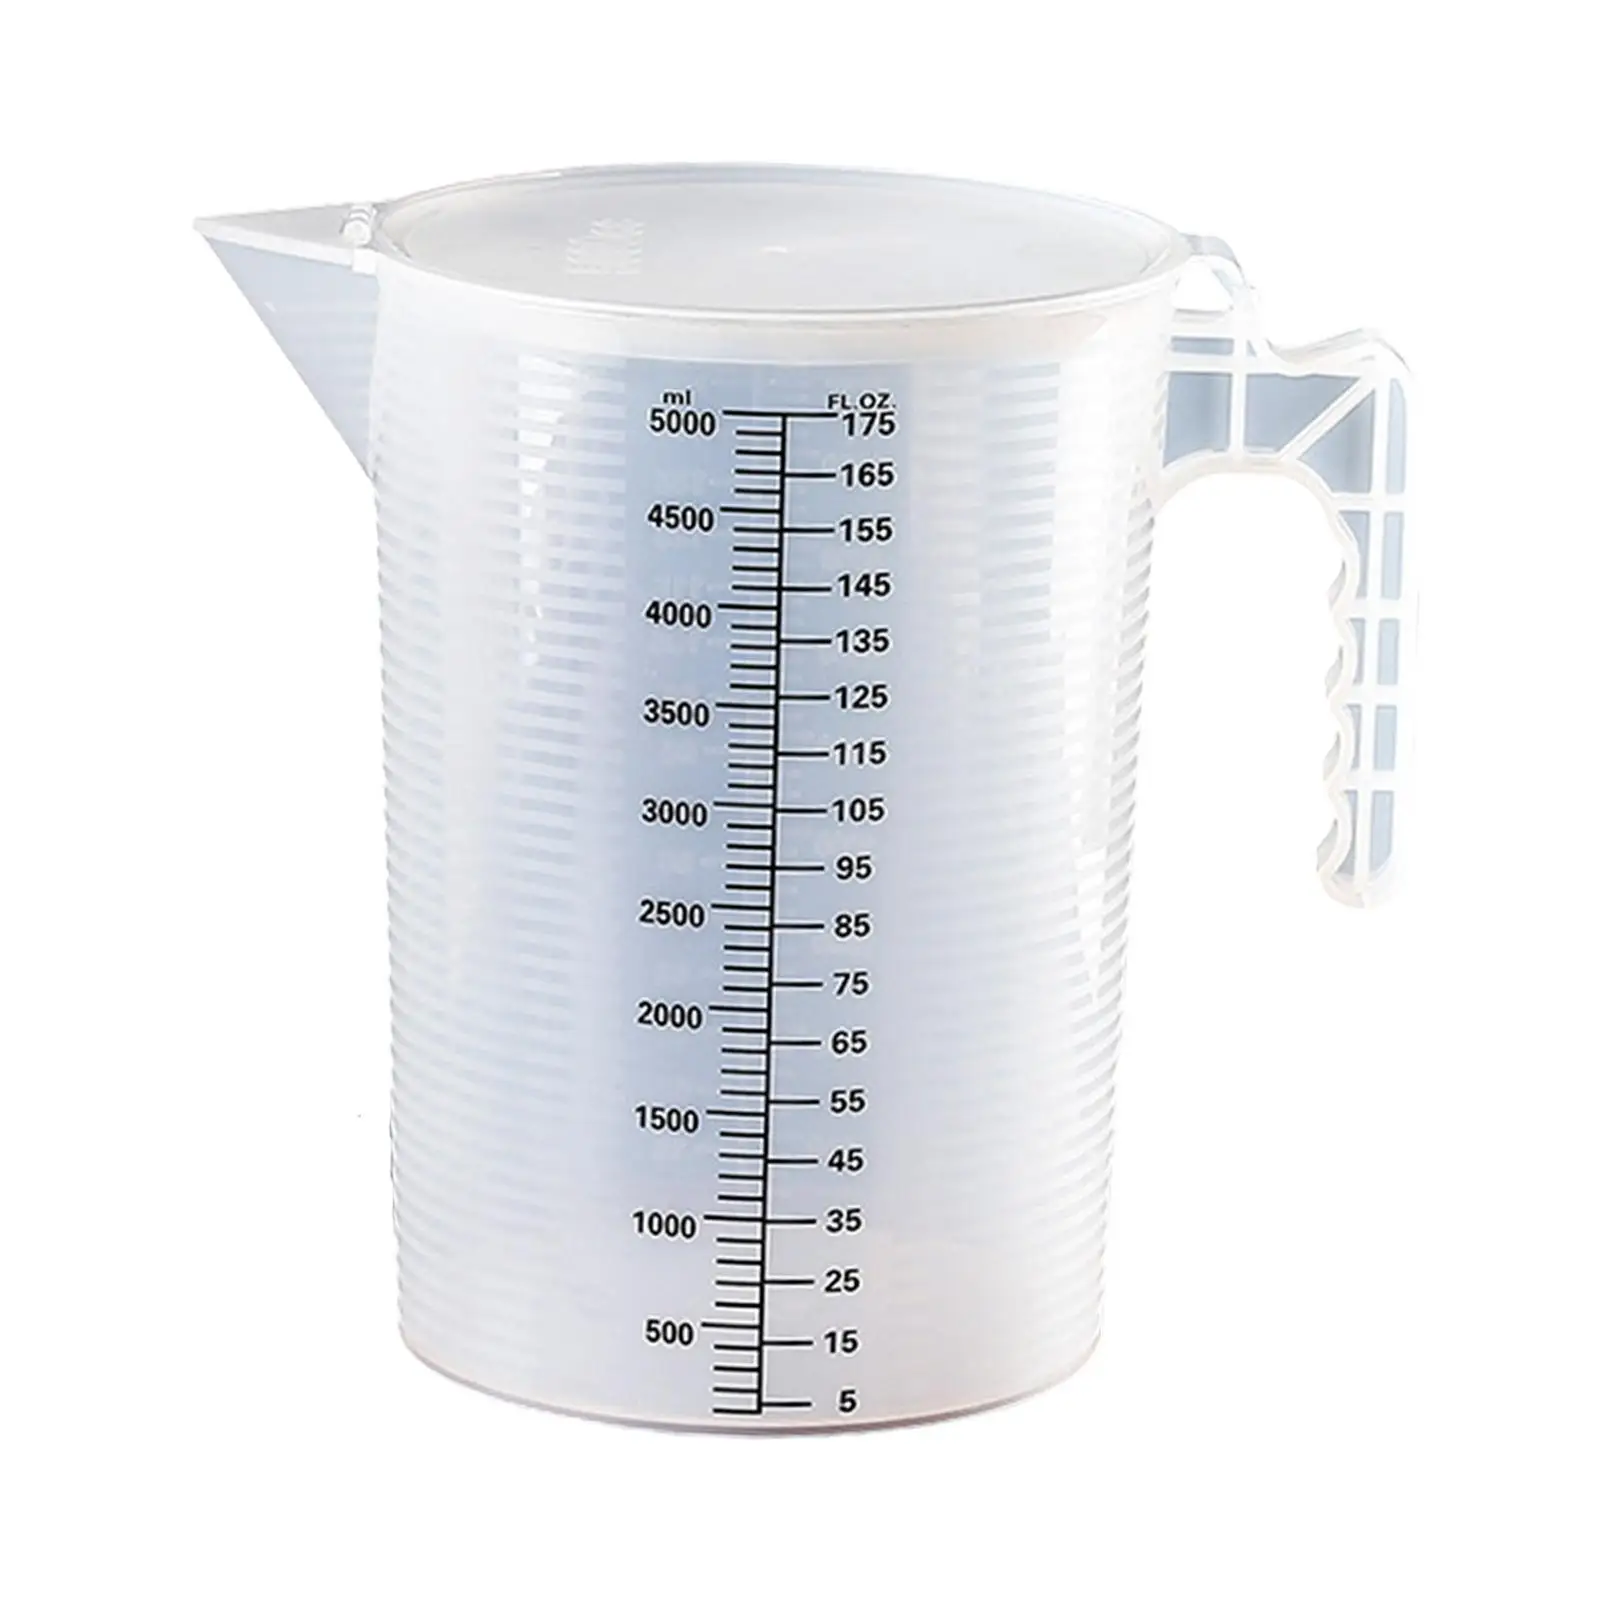 Plastic Pitcher Measuring Cup 5000ml Leakproof Cooking Baking Accessaries